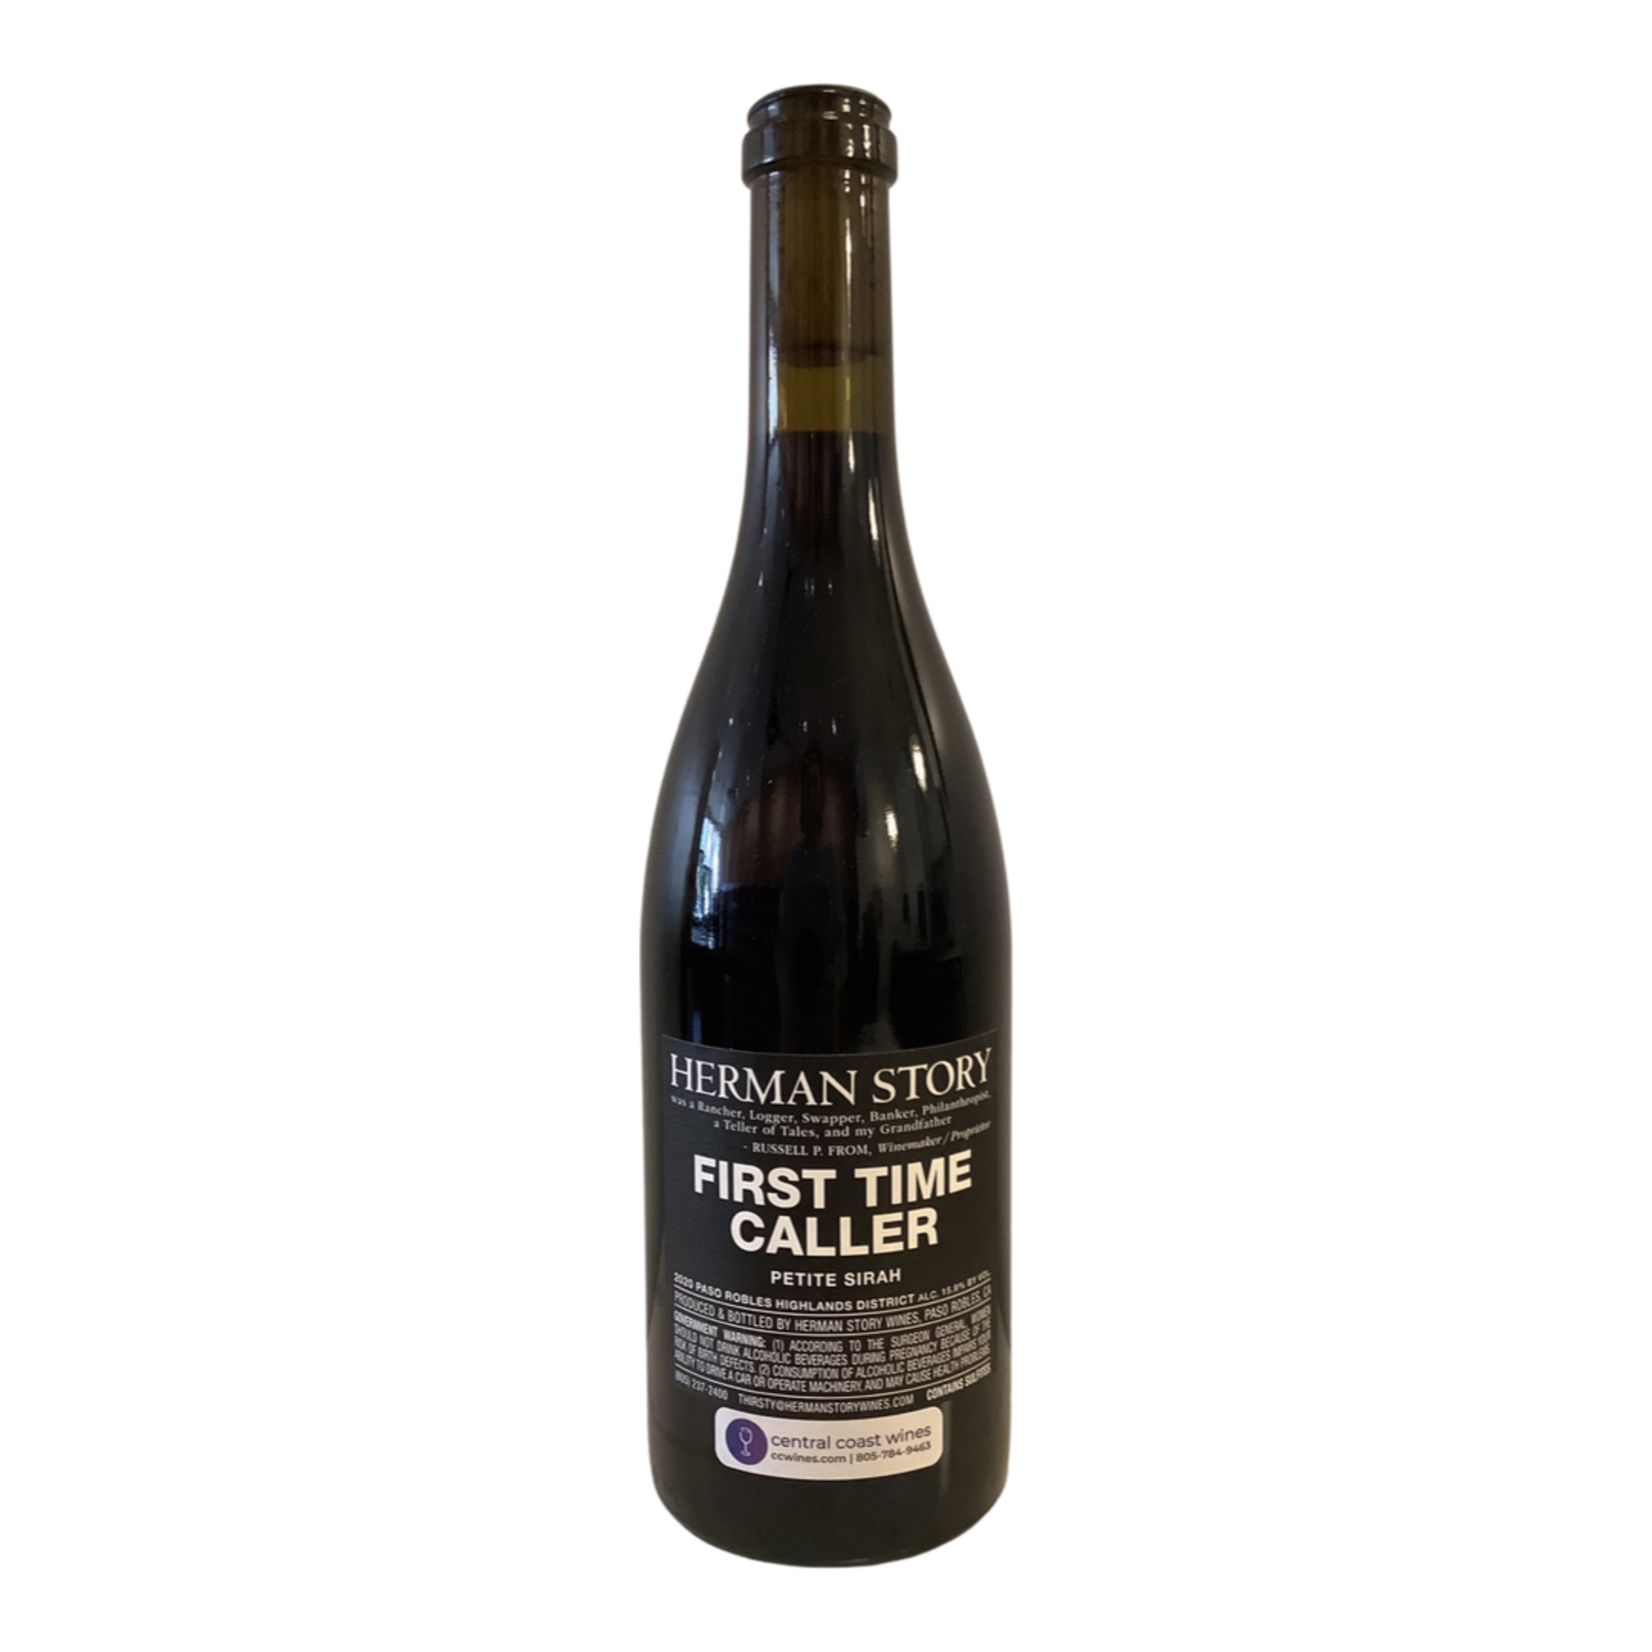 2019 Herman Story "First Time Caller" Petite Sirah, Paso Robles CA